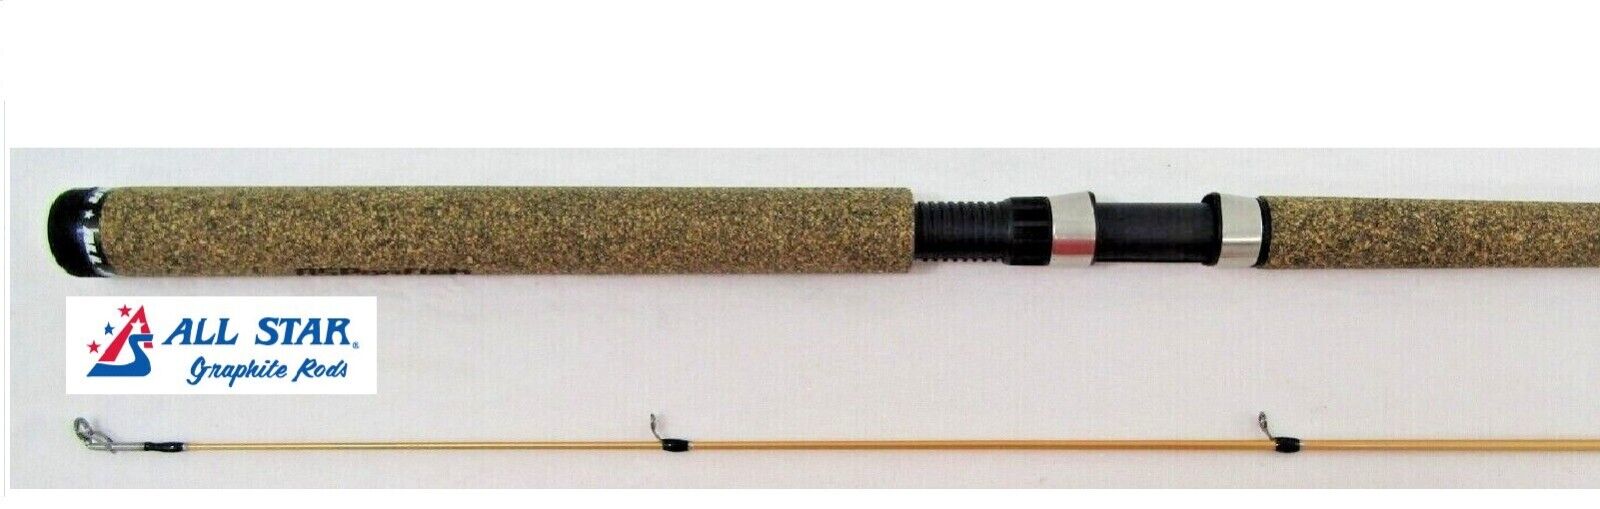 All Star PANFISH JIG Rod Graphite ASP Series Crappie Dock Shooter